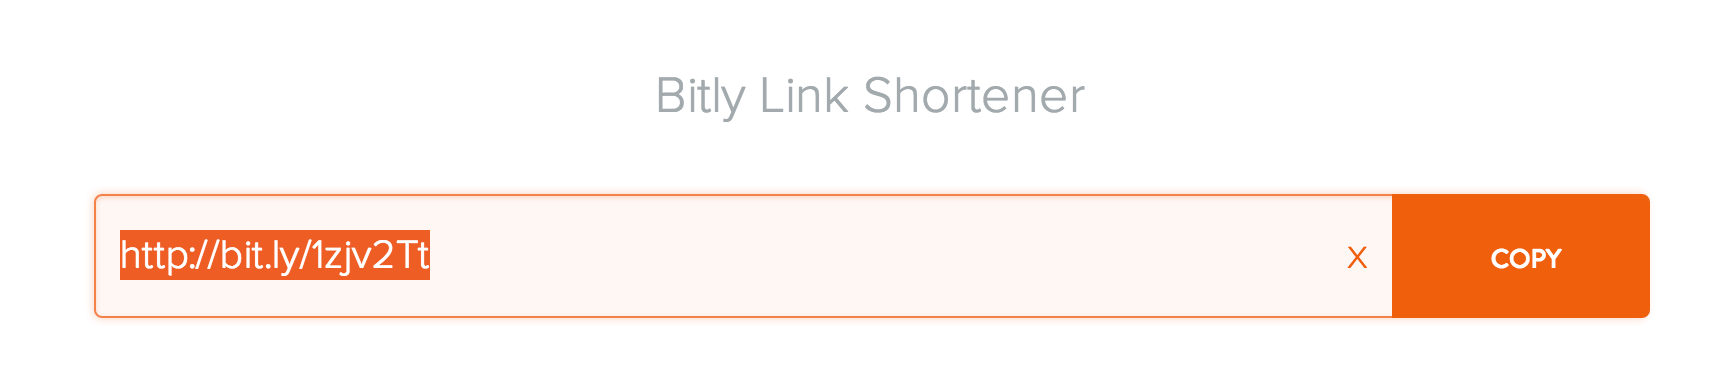 Copy Your Shortened URL to Share